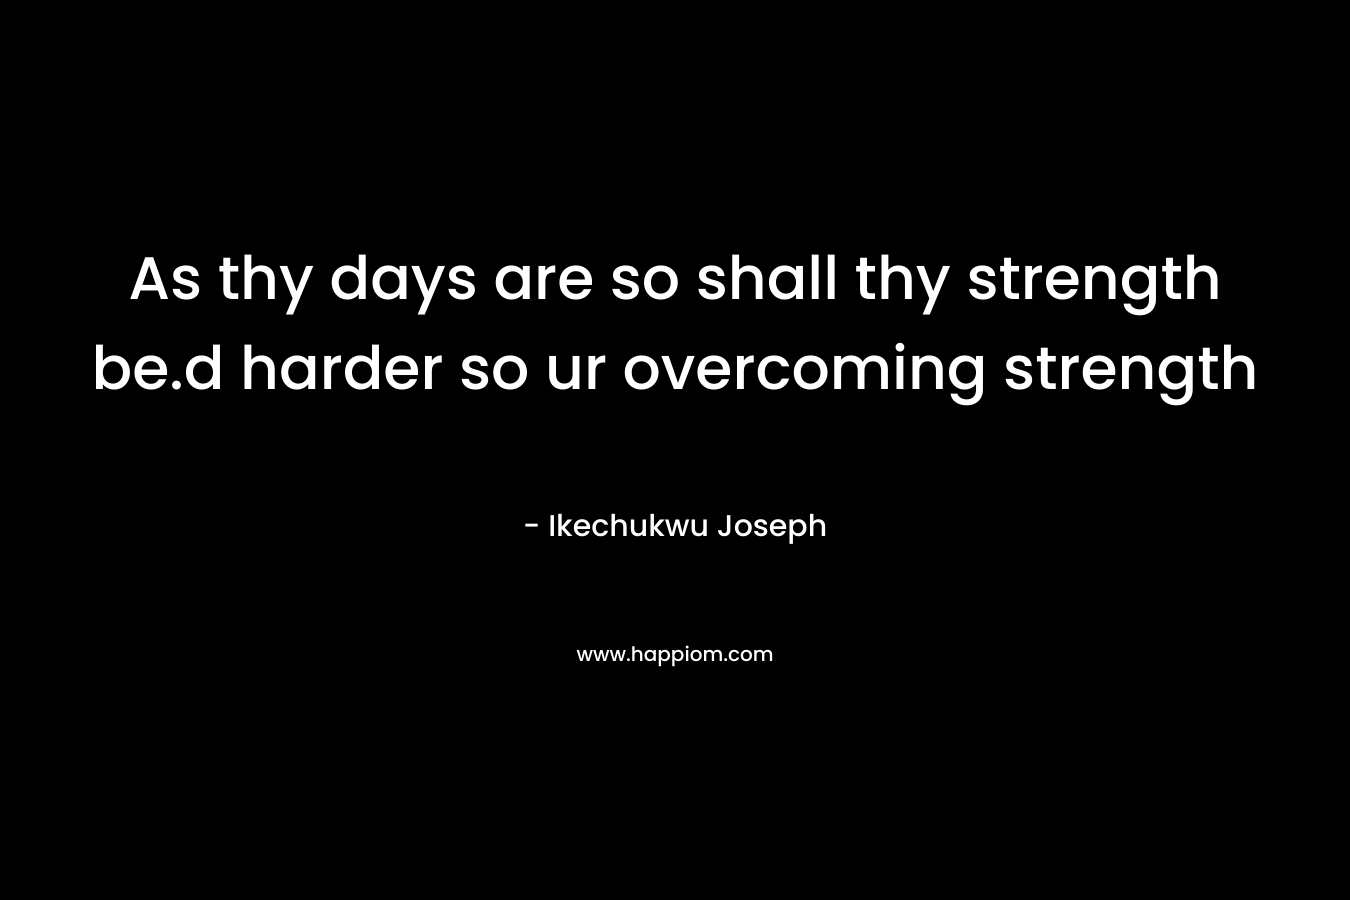 As thy days are so shall thy strength be.d harder so ur overcoming strength